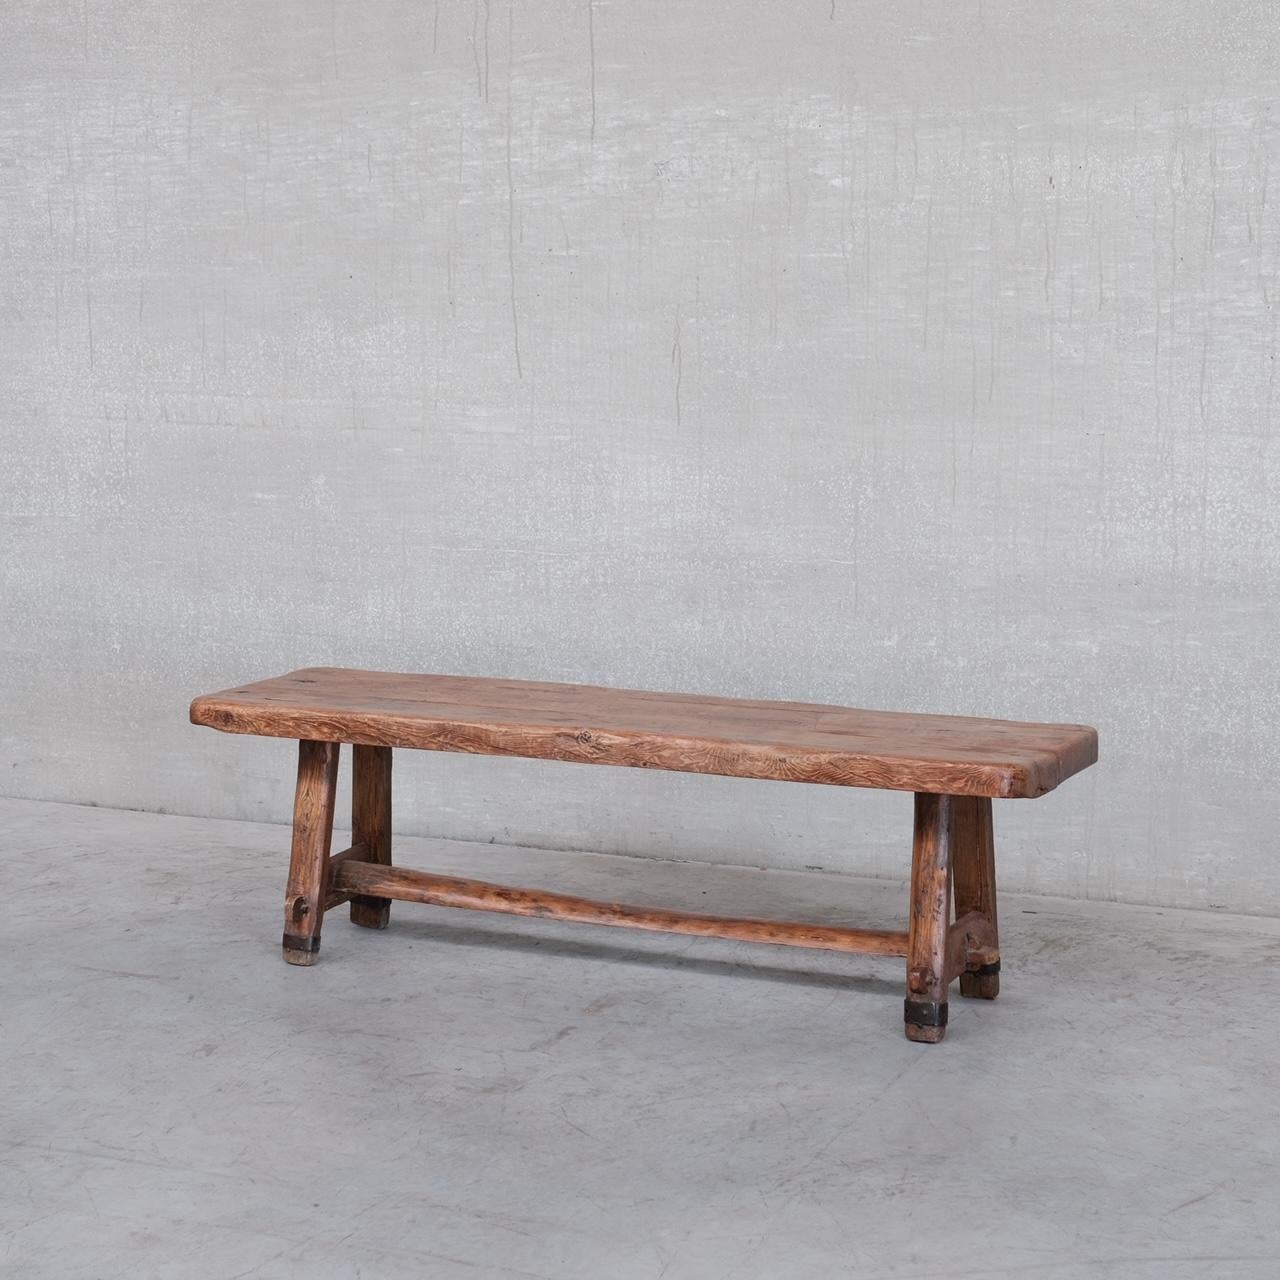 A brutalist wooden coffee table with iron details. 

France, c1950s. 

Of primitive brutalist style. 

Good condition, some scuffs and wear commensurate with age. 

Location: Belgium Gallery. 

Dimensions: 138 W x 46 D x 43 H in cm.